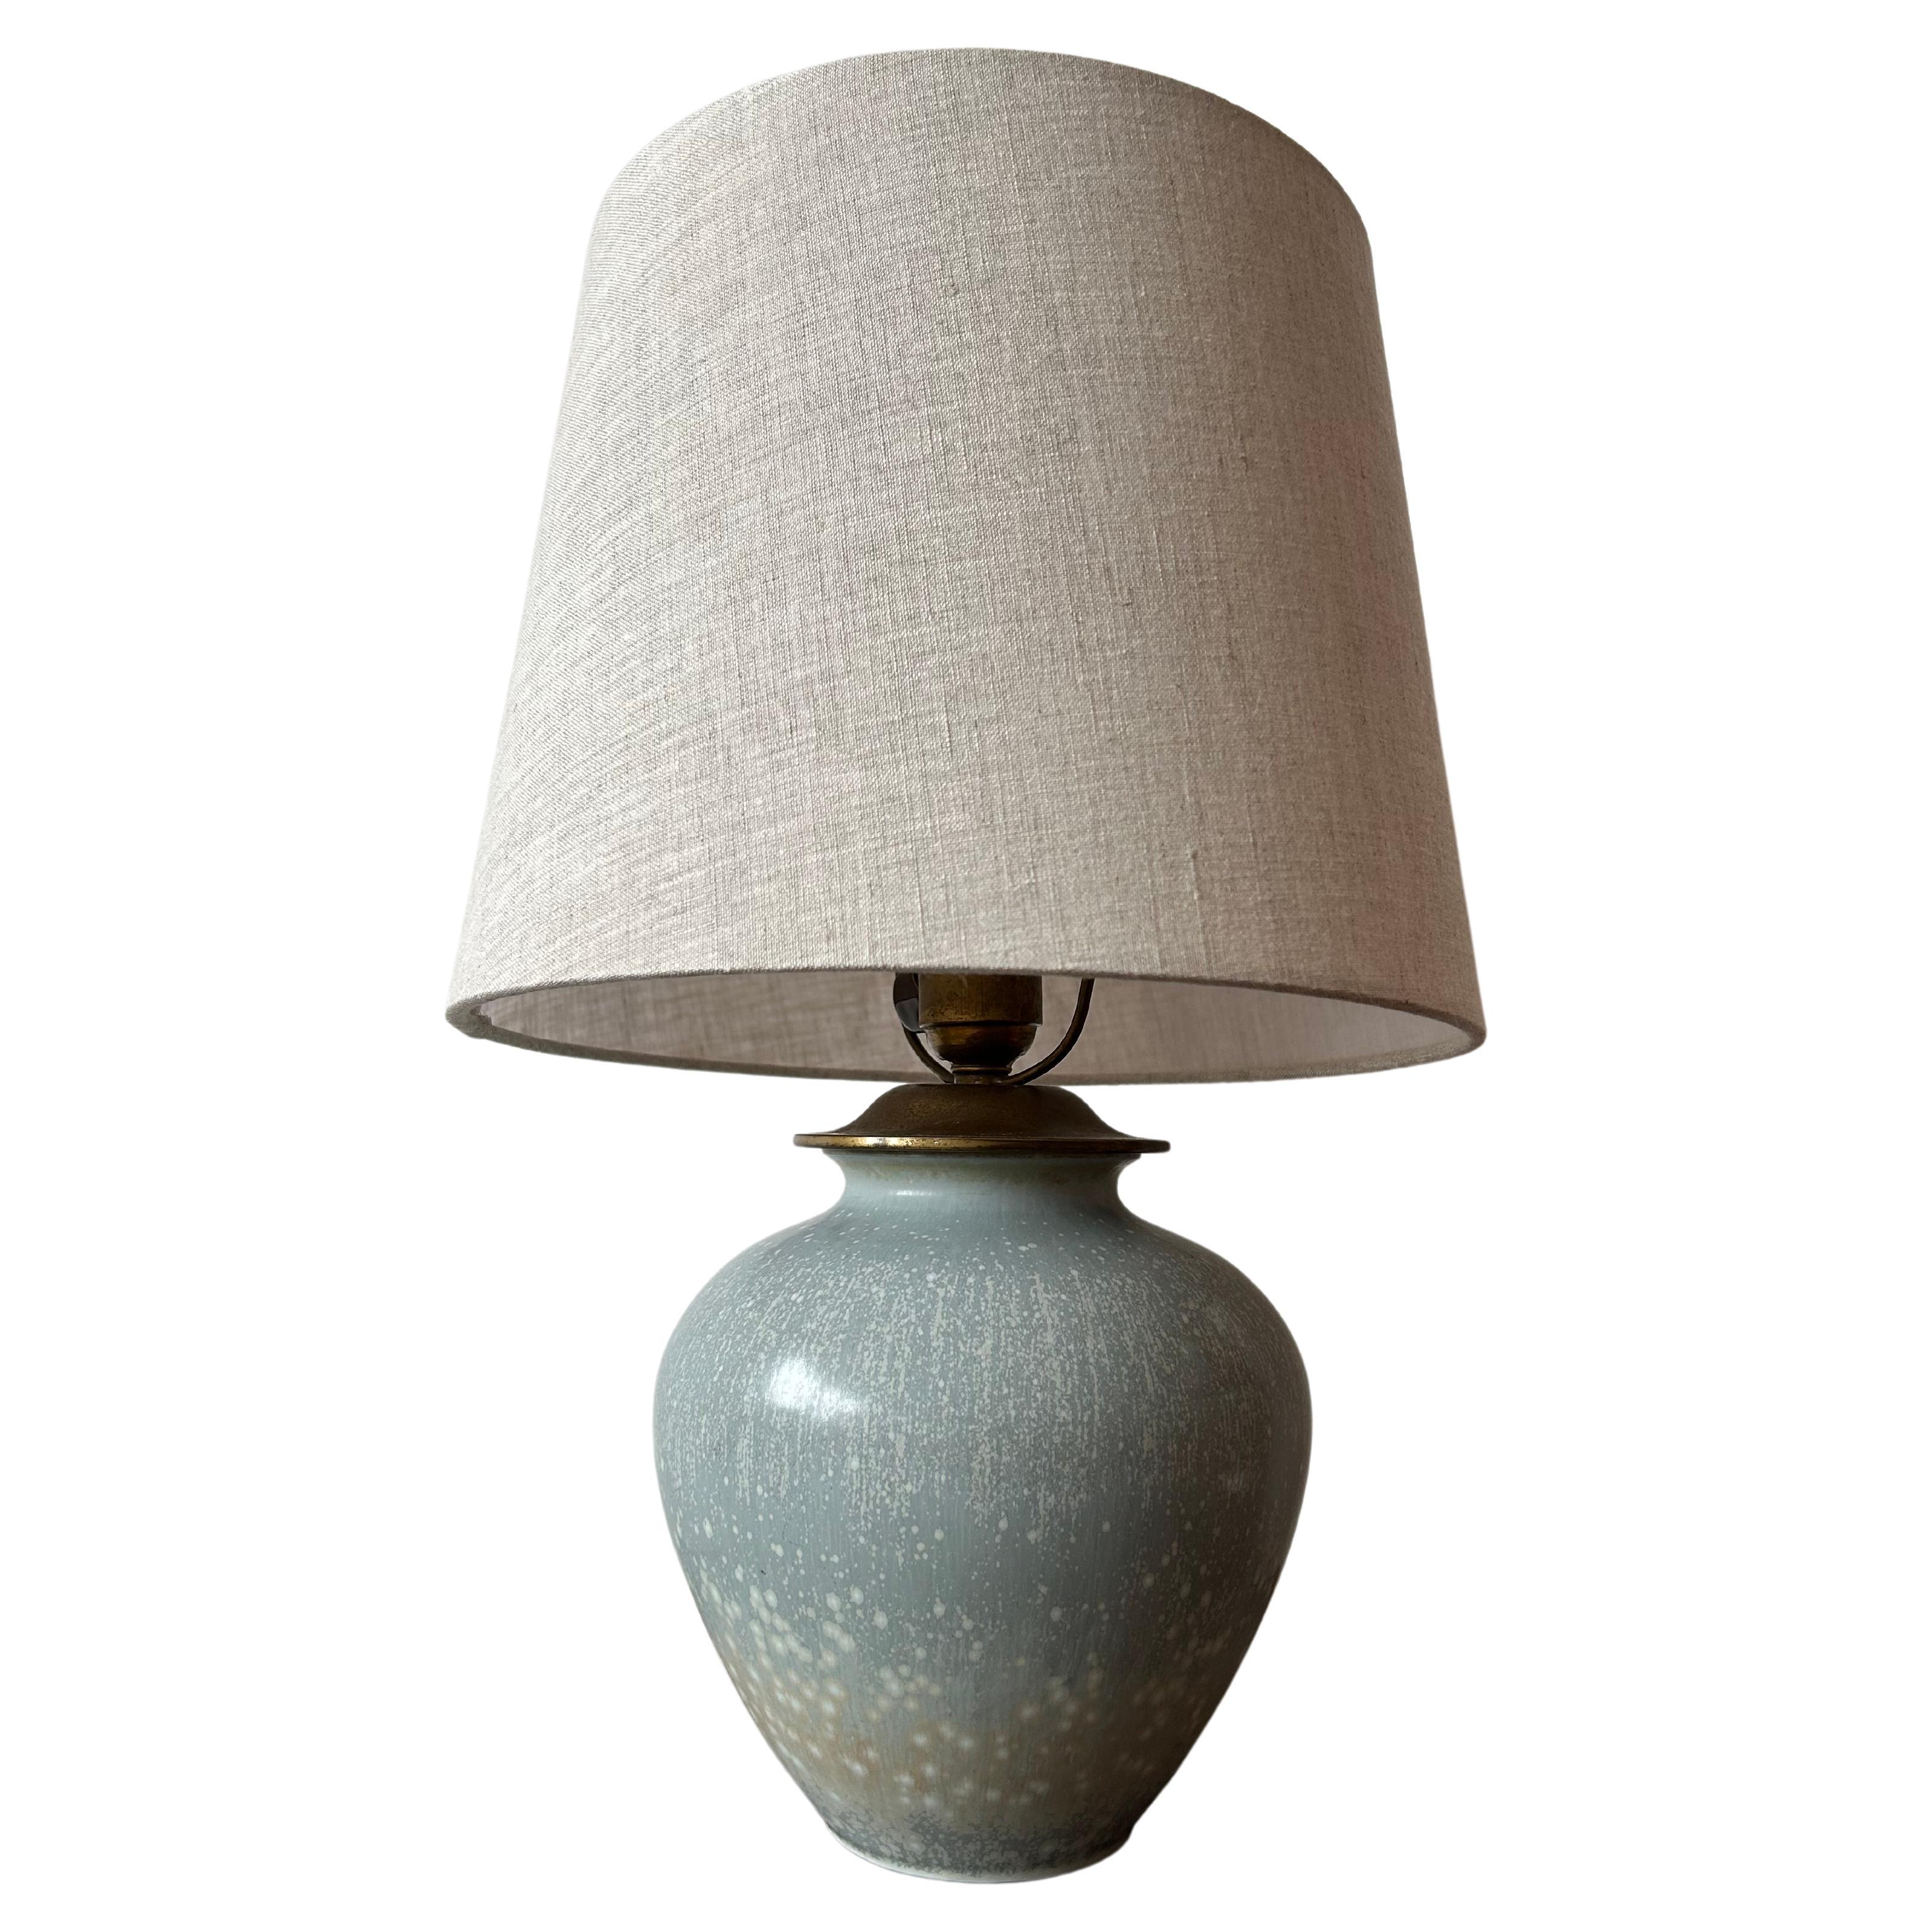 Gunnar Nylund ceramic table lamp  For Sale